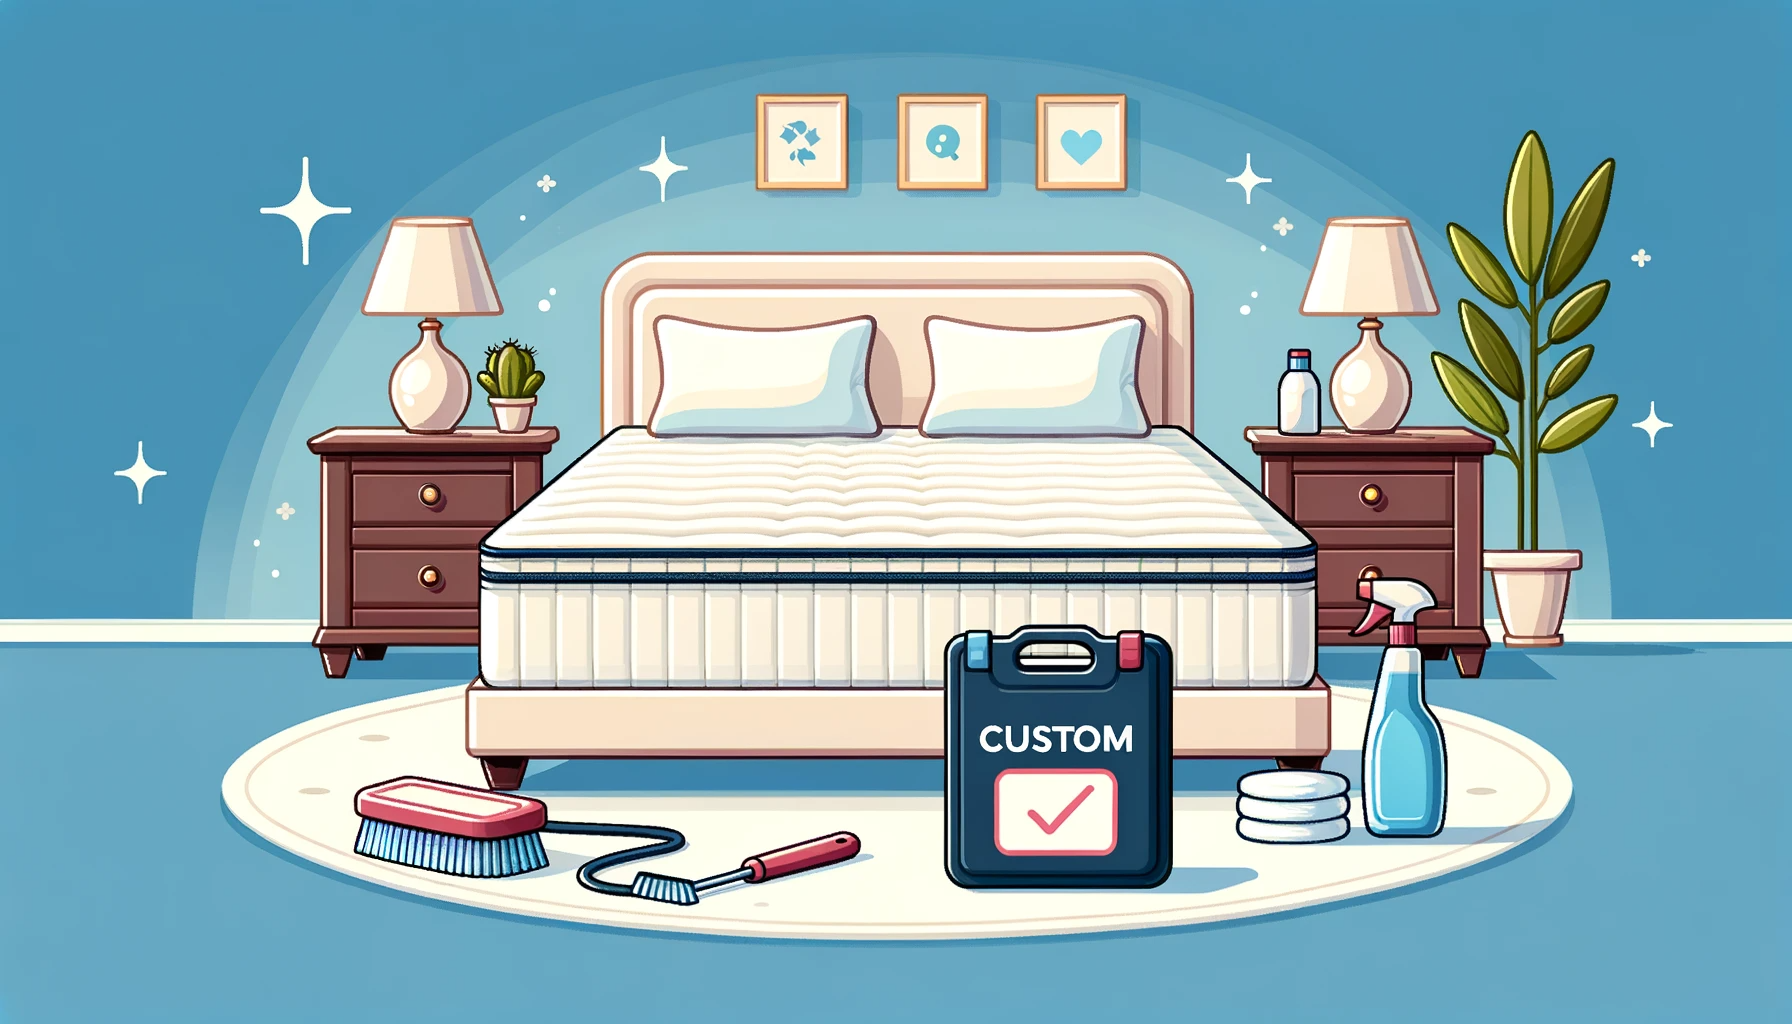 Vector illustration of a bedroom scene with a pristine custom mattress. Close-by, there's a care kit with cleaning and maintenance tools, indicating the proper way to care for the mattress.